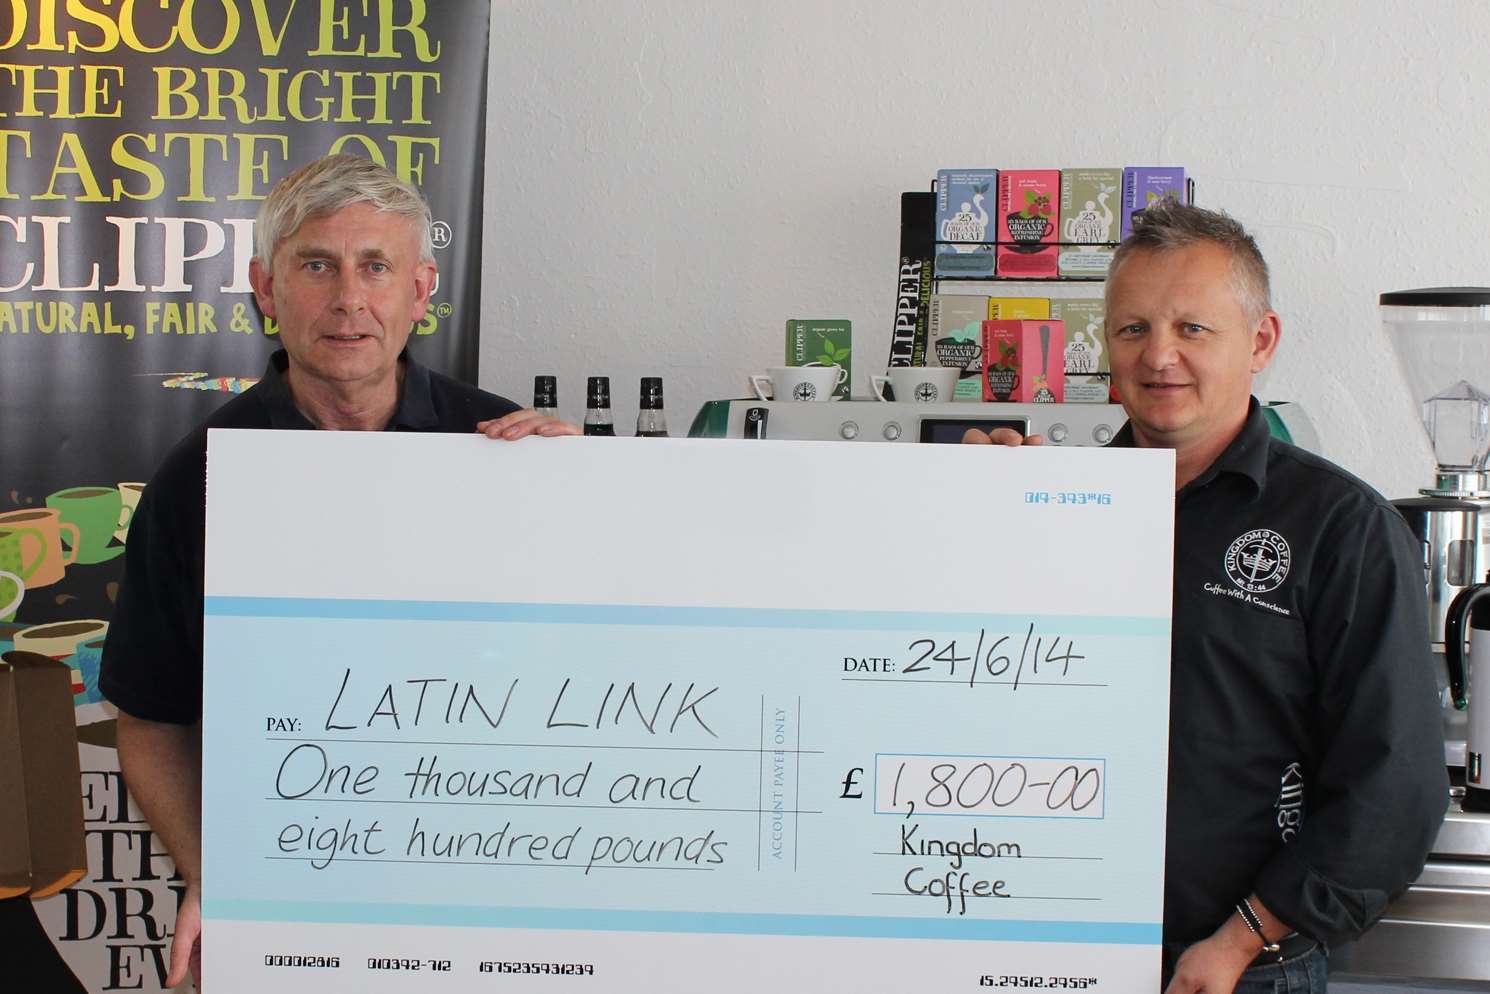 Jonathan Leeson, pictured left, Latin Link’s Area Representative, receiving the cheque from Darren Rayner of Kingdom Coffee